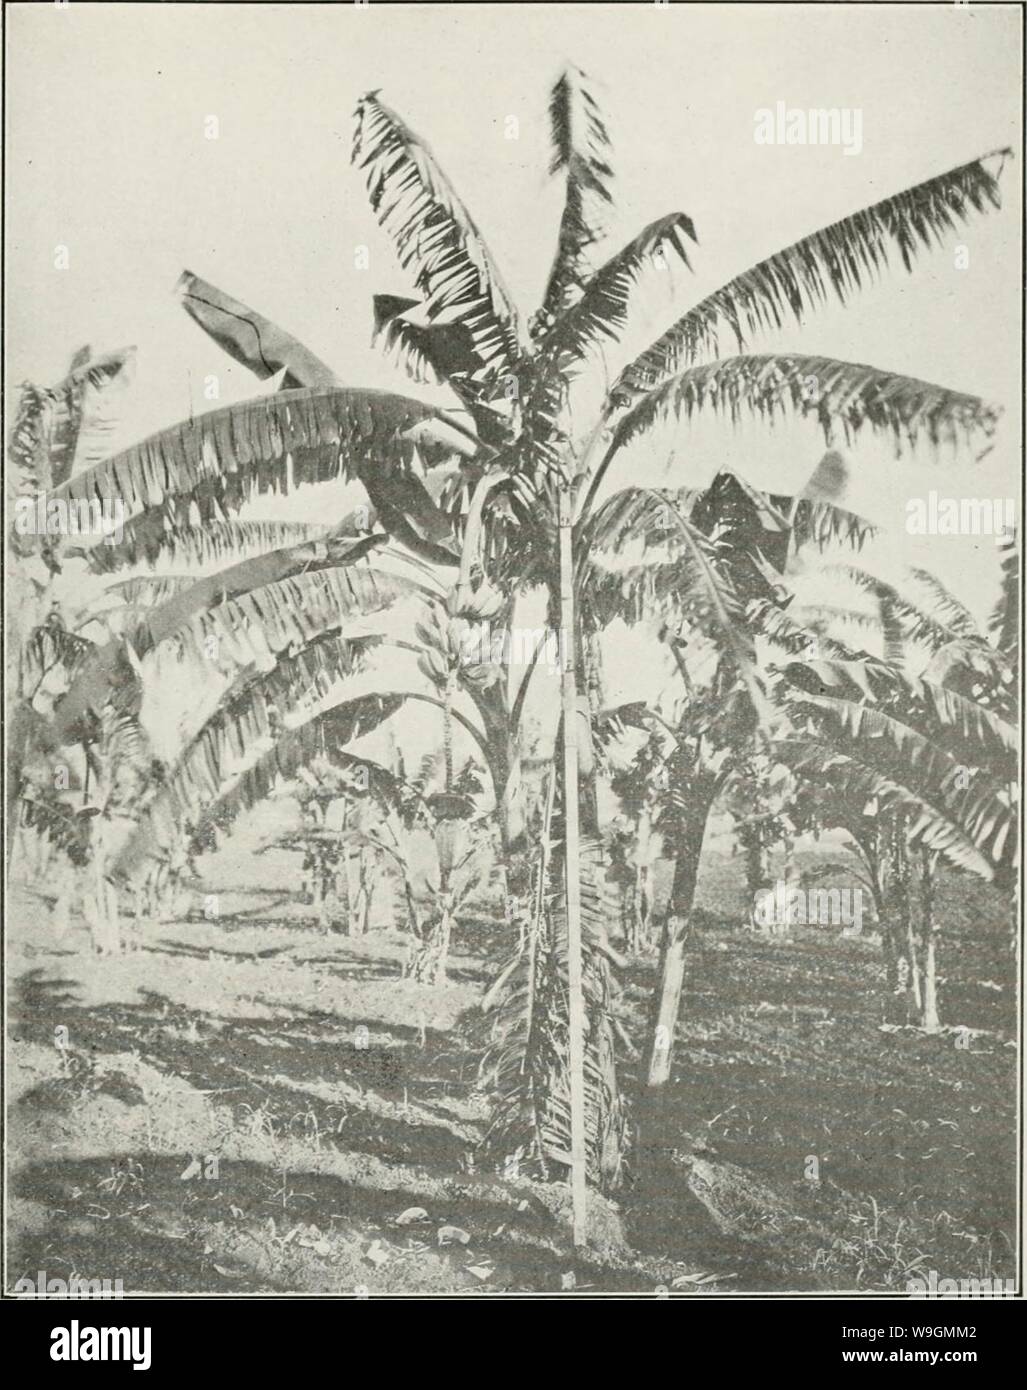 Archive image from page 288 of The Cuba review (1907-1931) Stock Photo